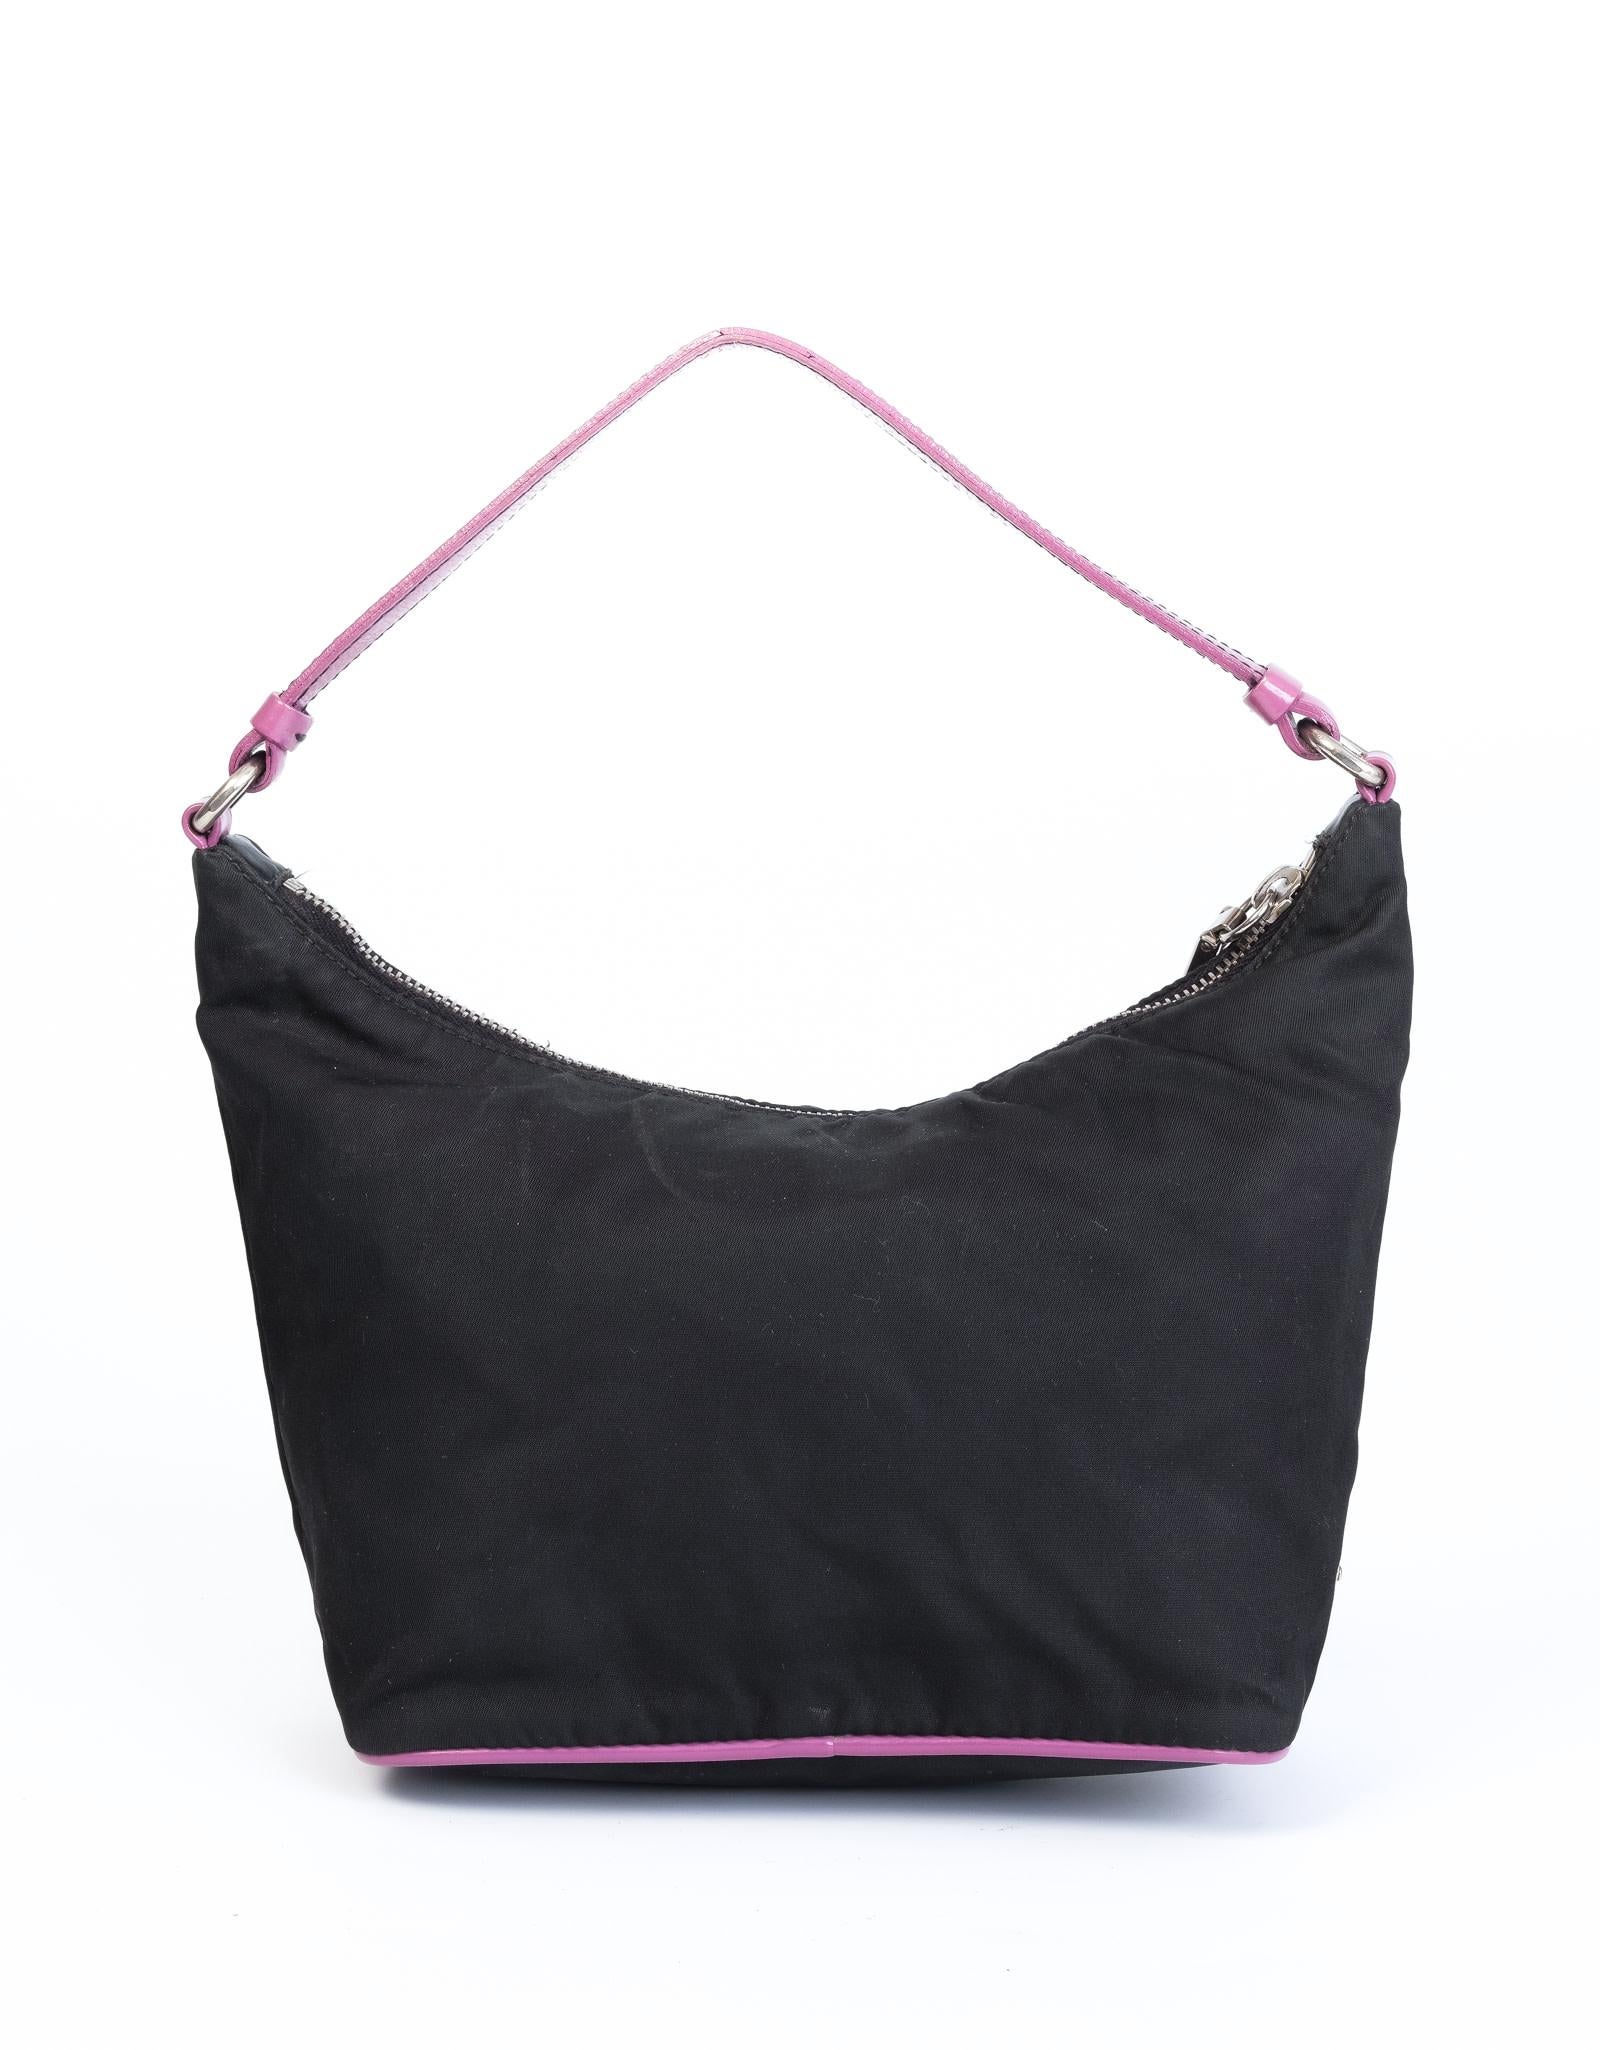 This shoulder bag features a nylon body with leather trim and front pocket in playful pink, a flat pink leather strap, a top zip closure and an interior zip pocket.

COLOR: Black
MATERIAL: Tessuto nylon
ITEM CODE: 31
MEASURES: H 3.5” x L 5” x D